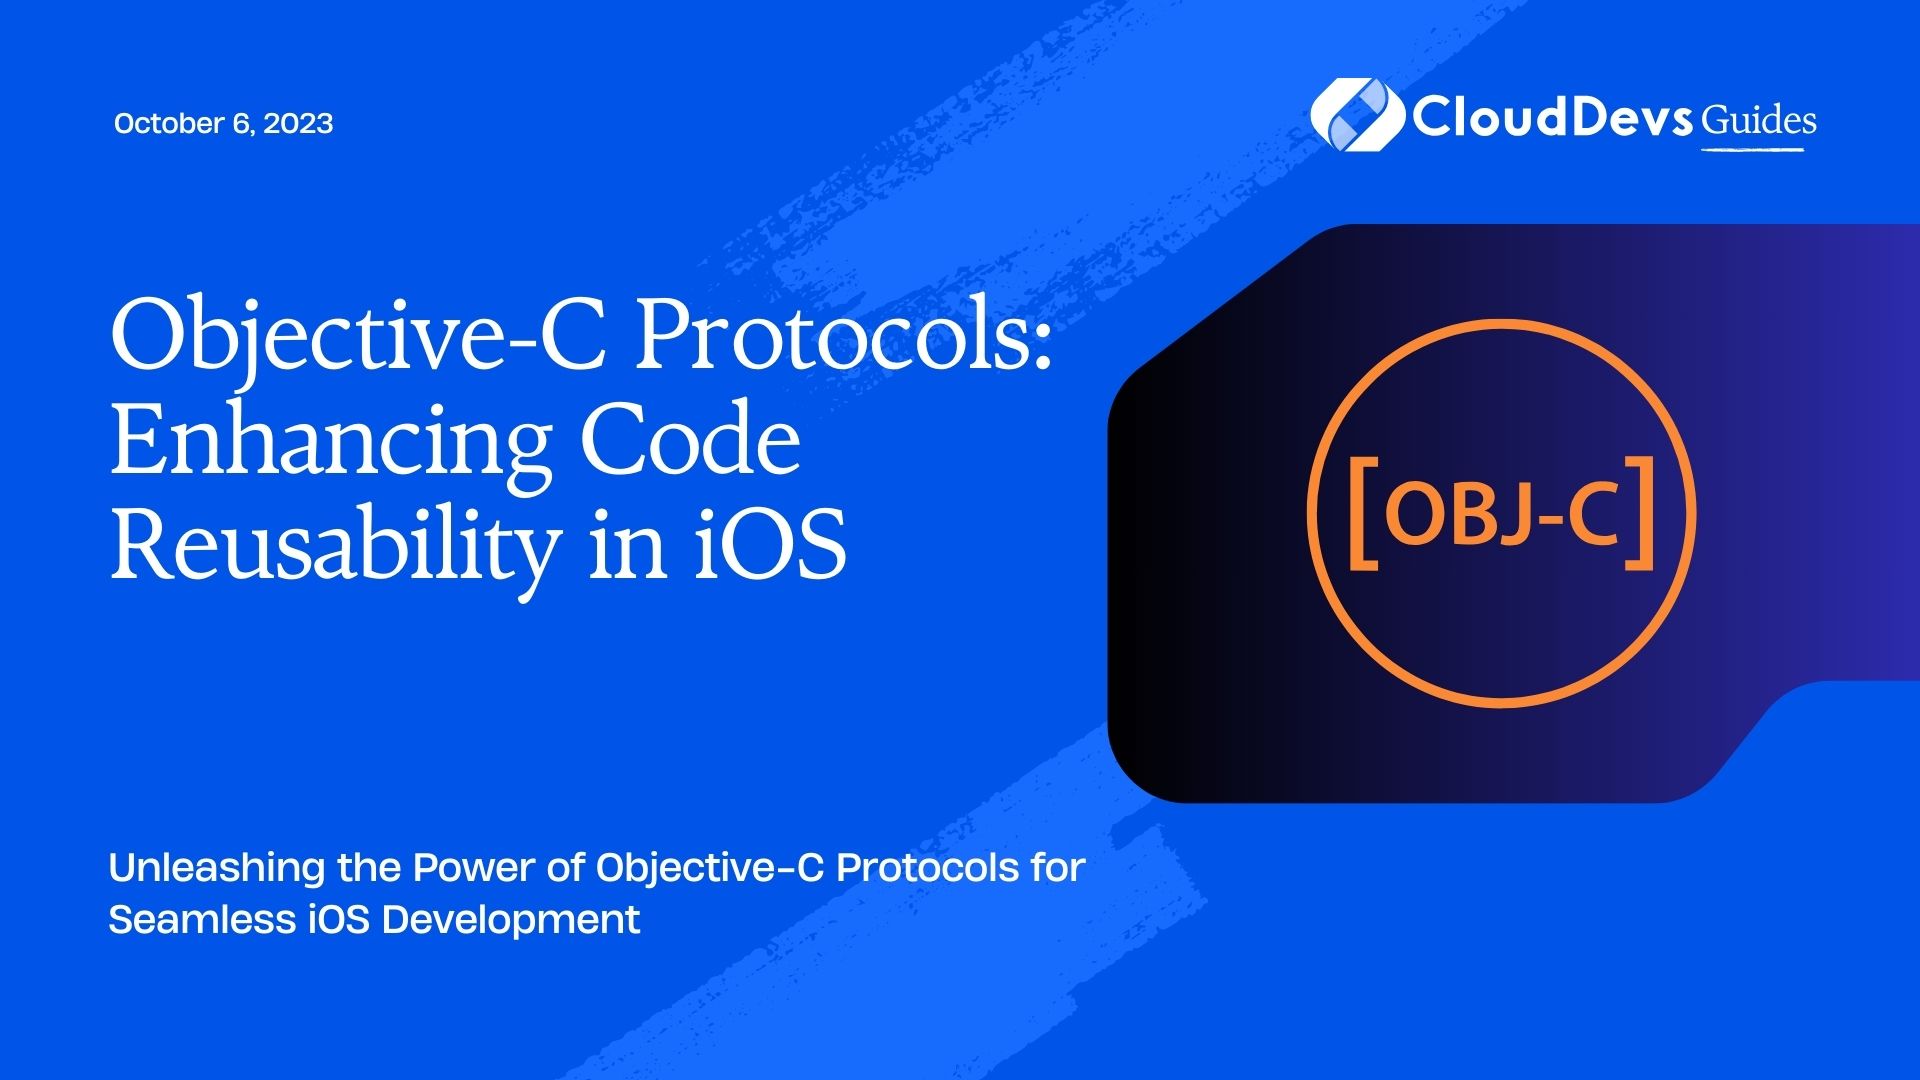 Objective-C Protocols: Enhancing Code Reusability in iOS